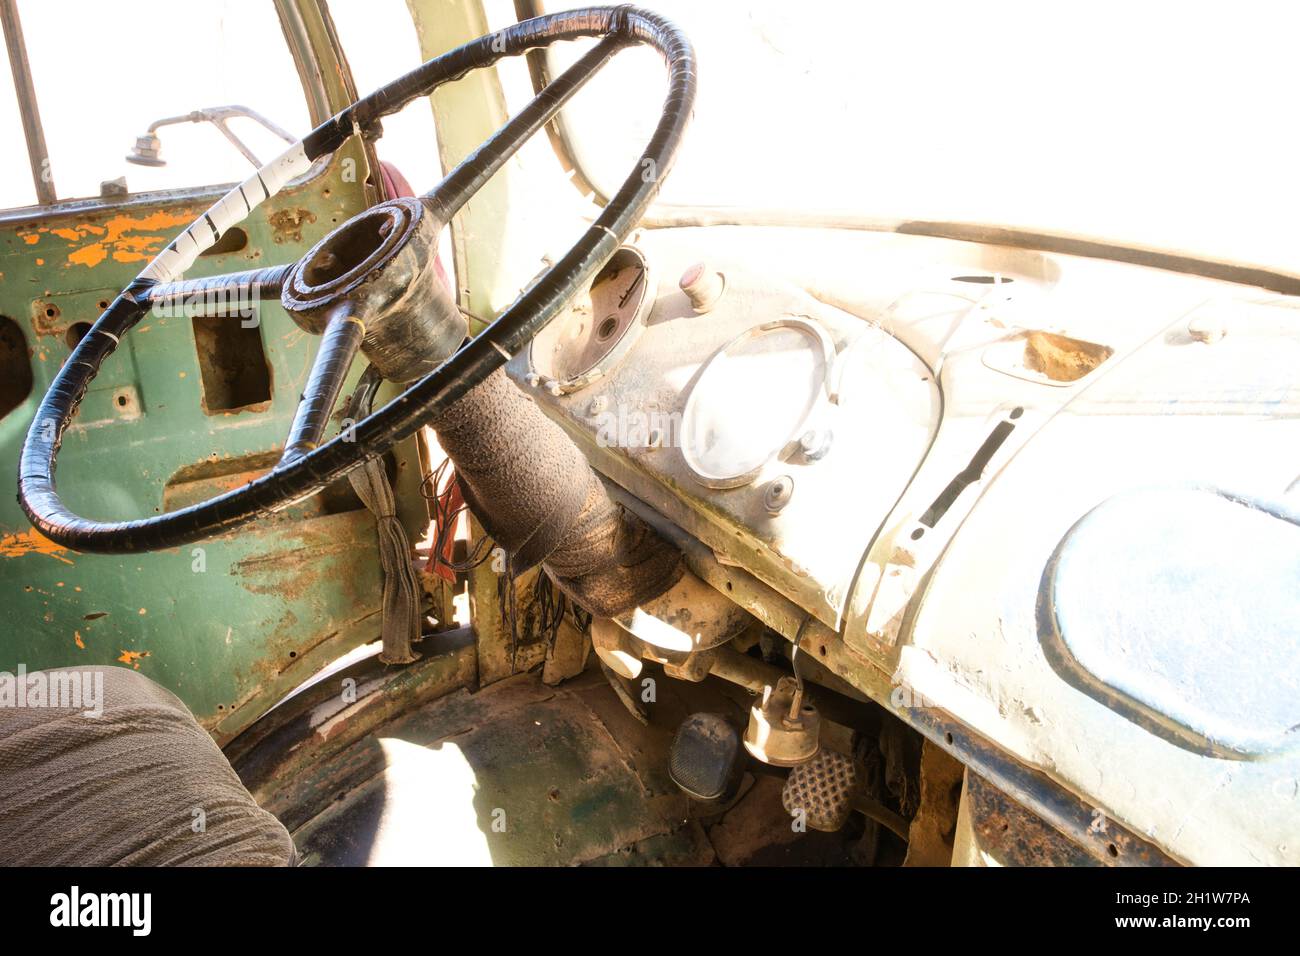 Interior of a driver's cab of an old abandoned and damaged vintage truck Stock Photo